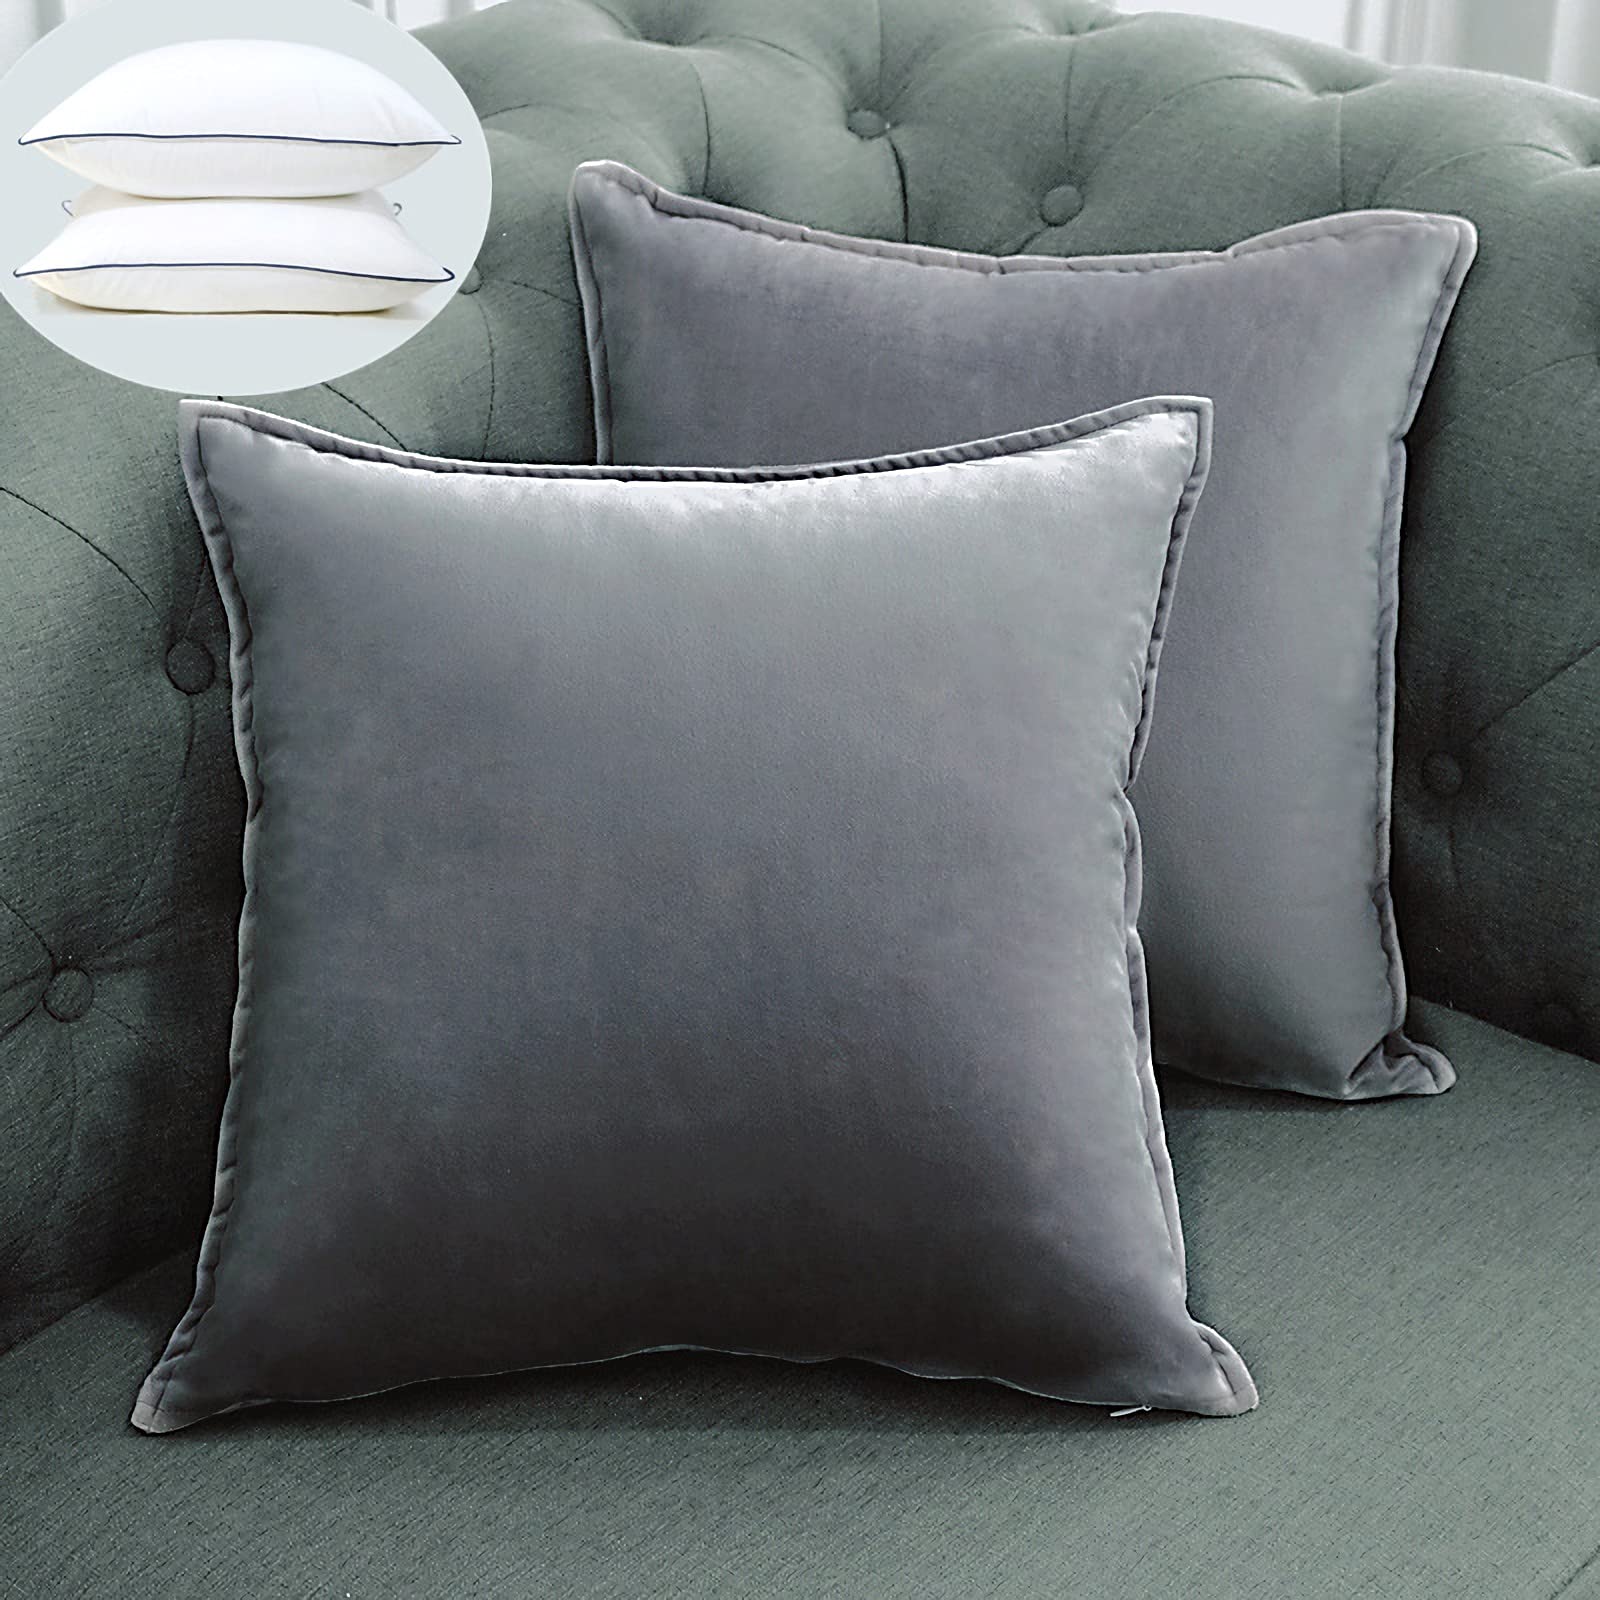 BOYANG Grey Cushions with Covers included sets 4(2 cushion cover 18x18in and 2 cushion Inserts 20x20in) Cushions for bed Velvet Throw Pillows Sofa Garden Furniture Tent Car Bedroom Square Pillow